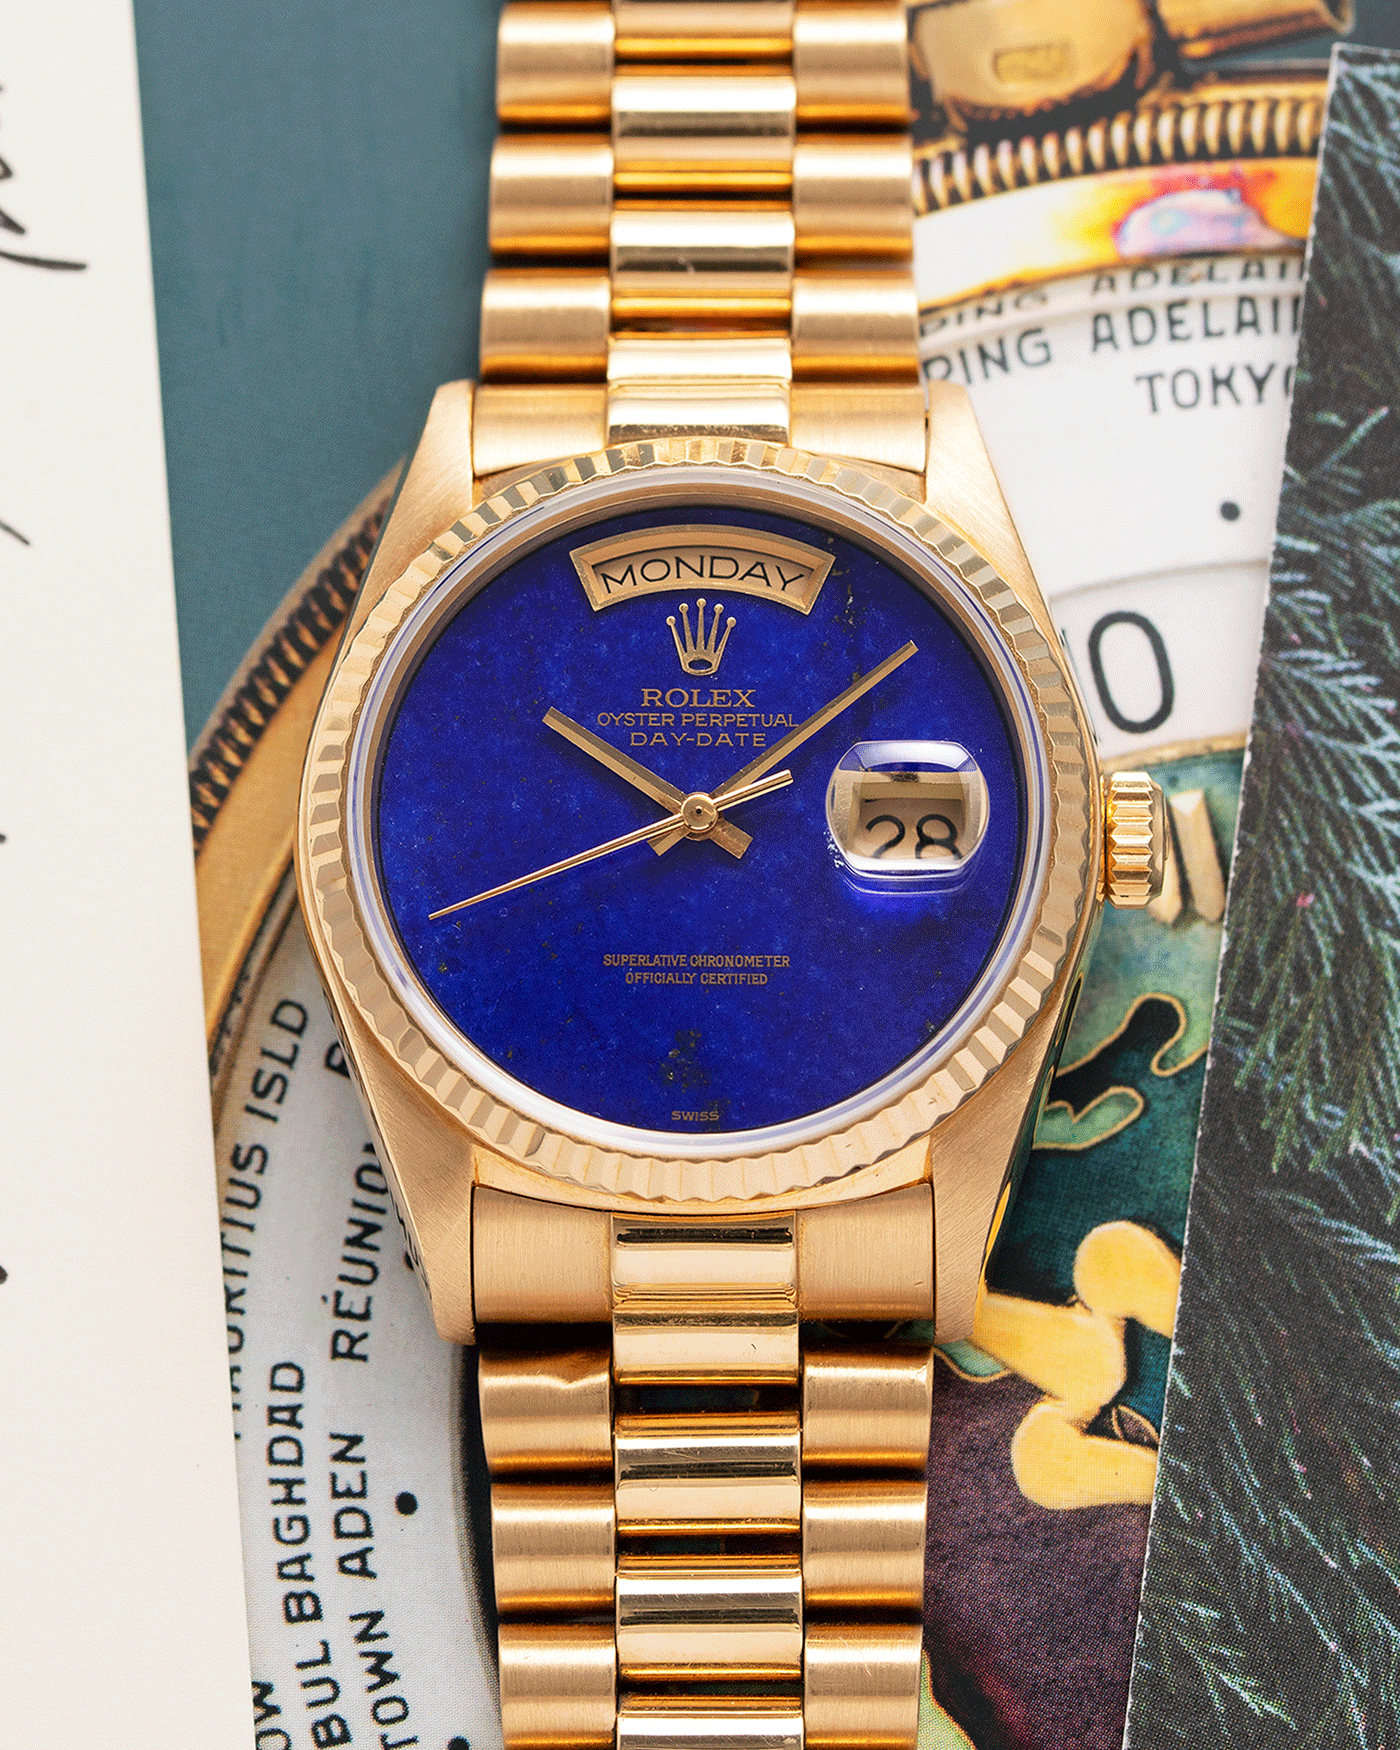 Brand: Rolex Year: 1984 Model: Day-Date Reference Number: 18038 Serial: 8,4XX,XXX Material: 18k Yellow Gold Movement: Cal. 3055 Case Diameter: 36mm Lug Width: 20mm Bracelet/Strap: Rolex 838518k Solid Gold President Bracelet